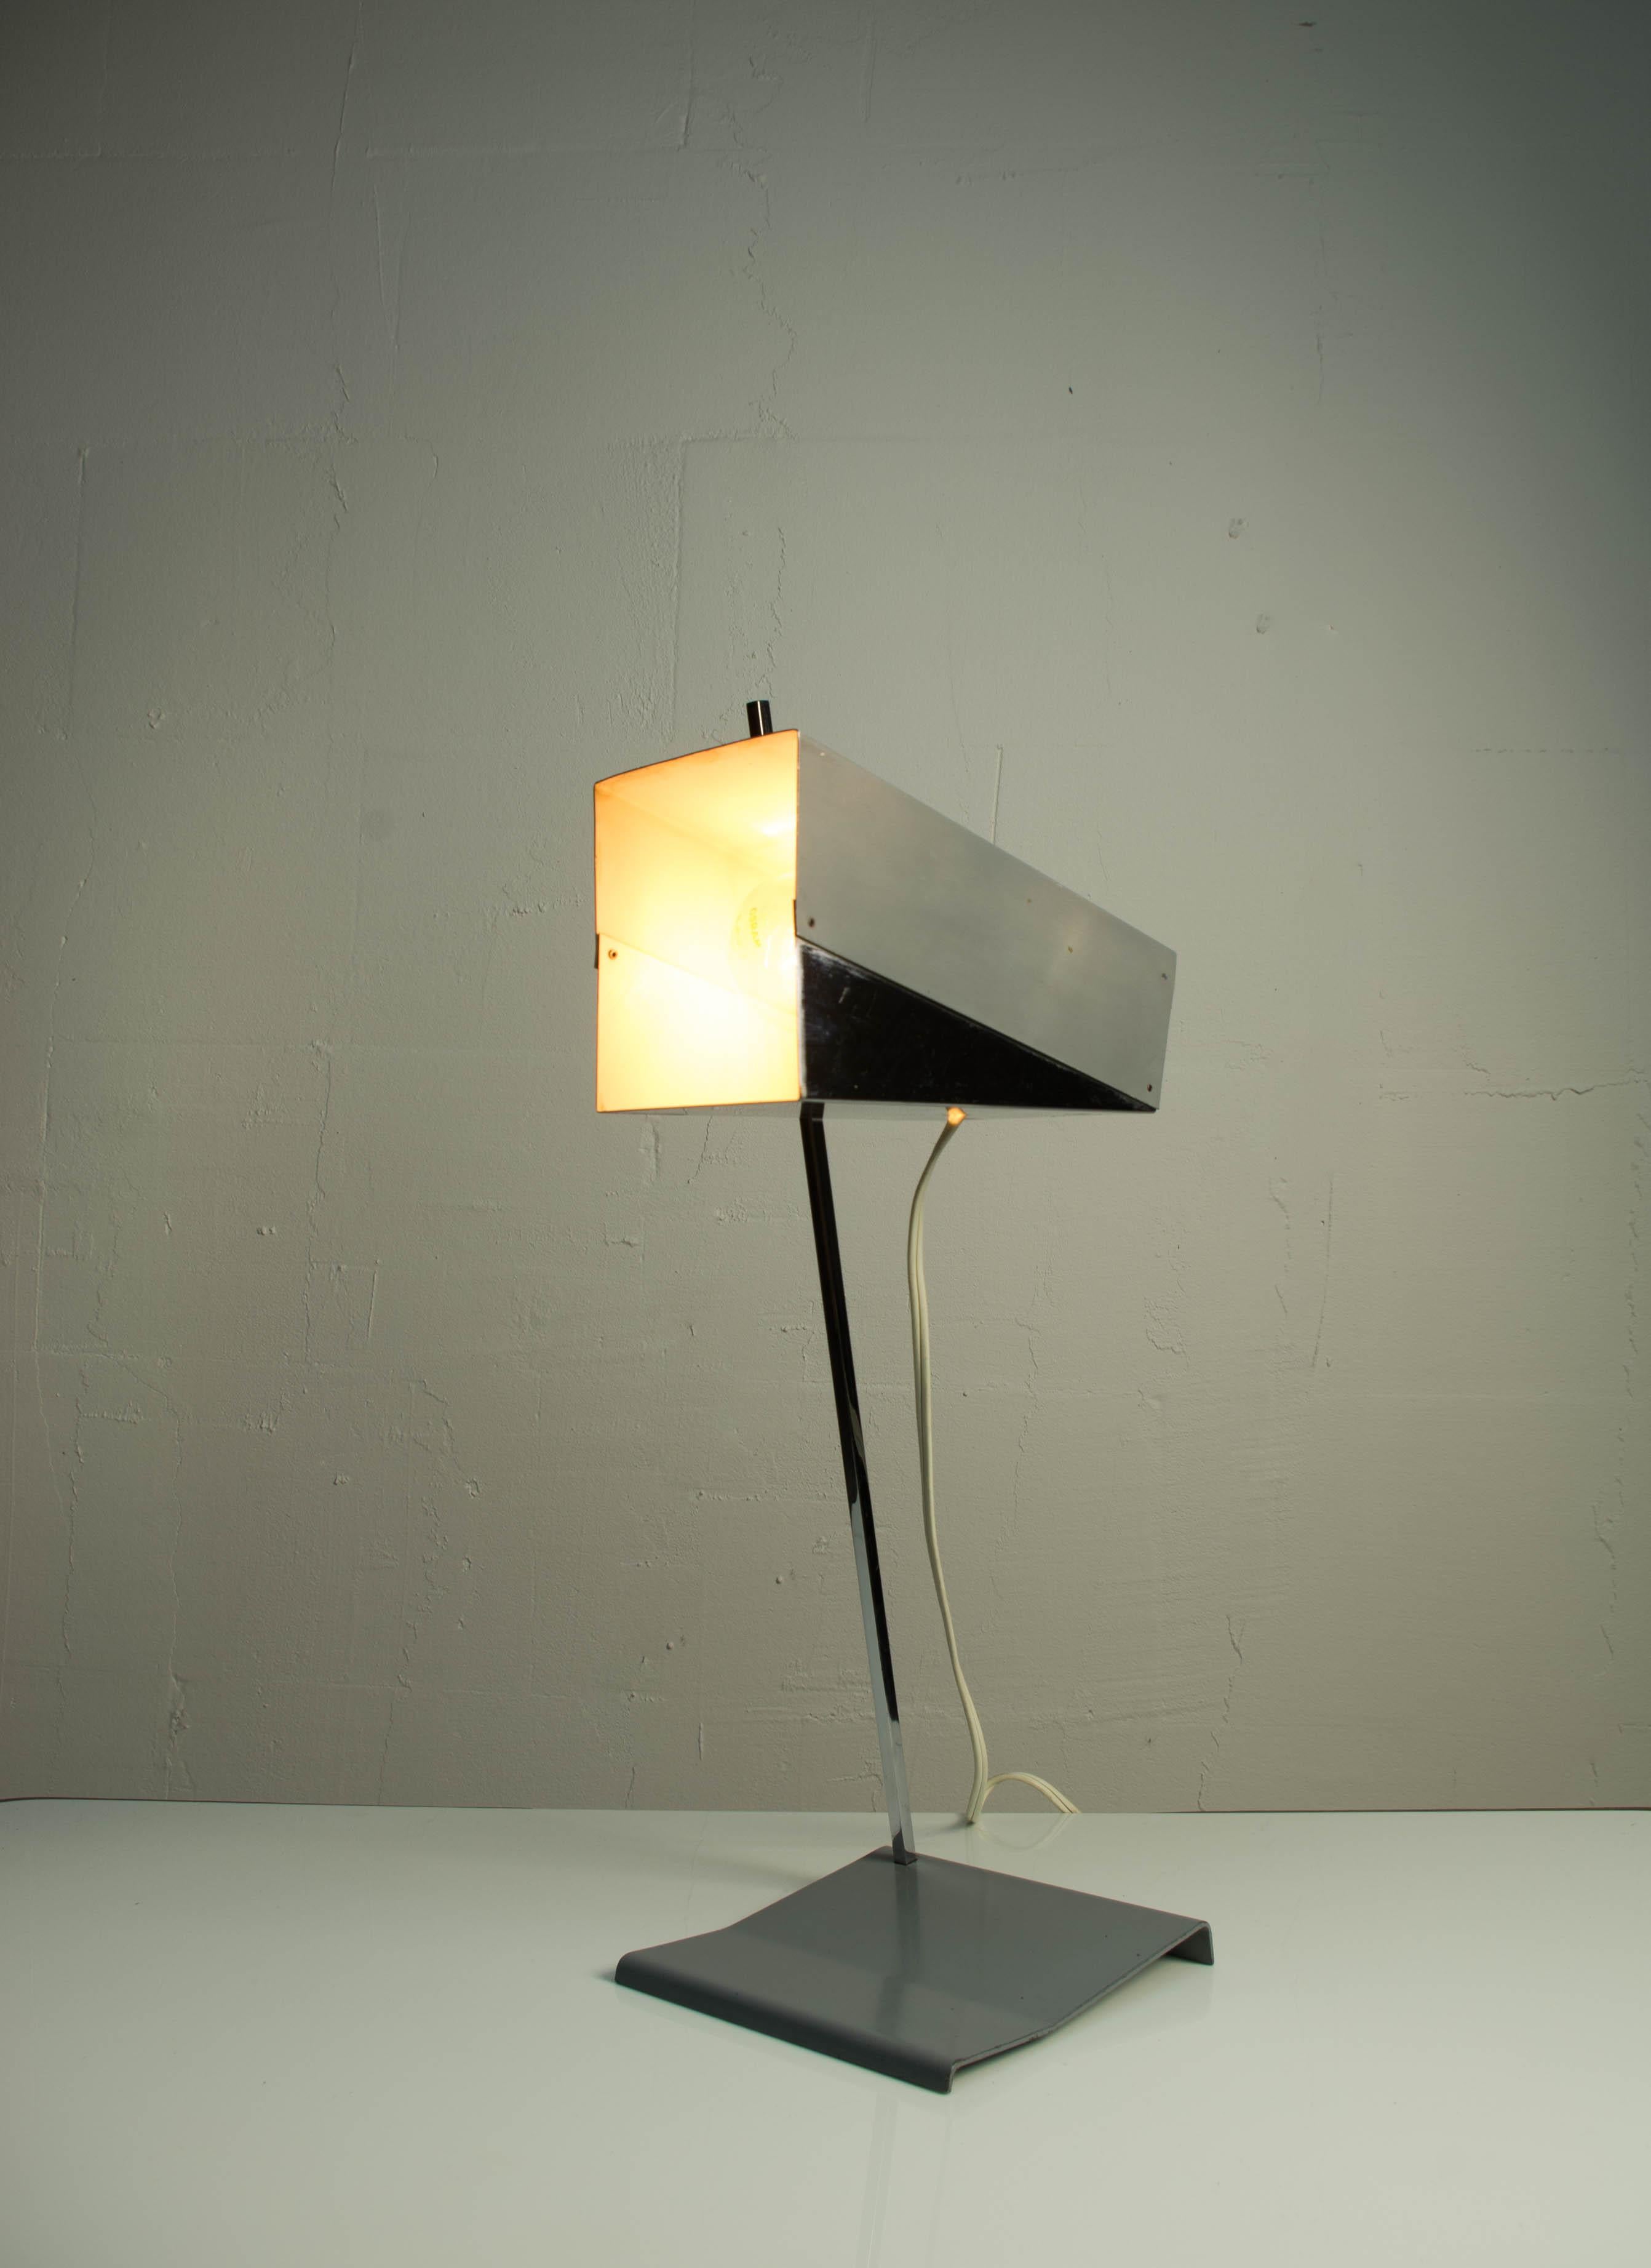 Table lamp with adjustable shade. Made from steel and chrome. Designed by Josef Hurka for Napako in Czechoslovakia in 1960s. E27 bulb.